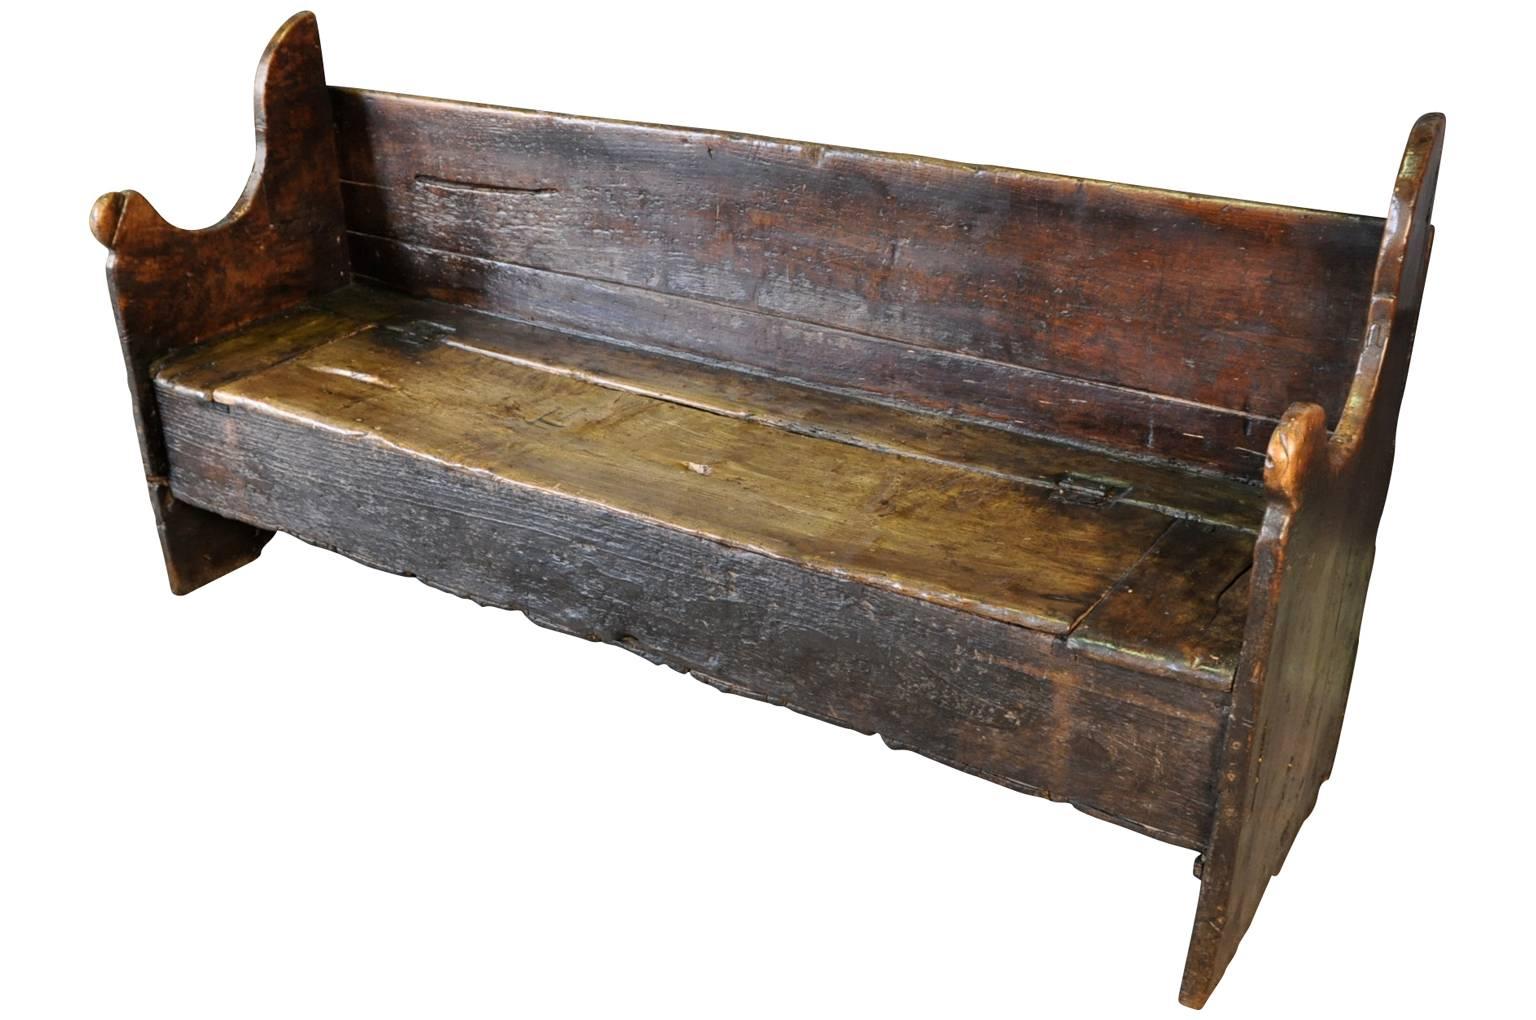 An outstanding 17th century bench from Northern Italy. Soundly constructed from stunning walnut and pine with a trunk space under the seat. Sensational patina - rich and luminous.